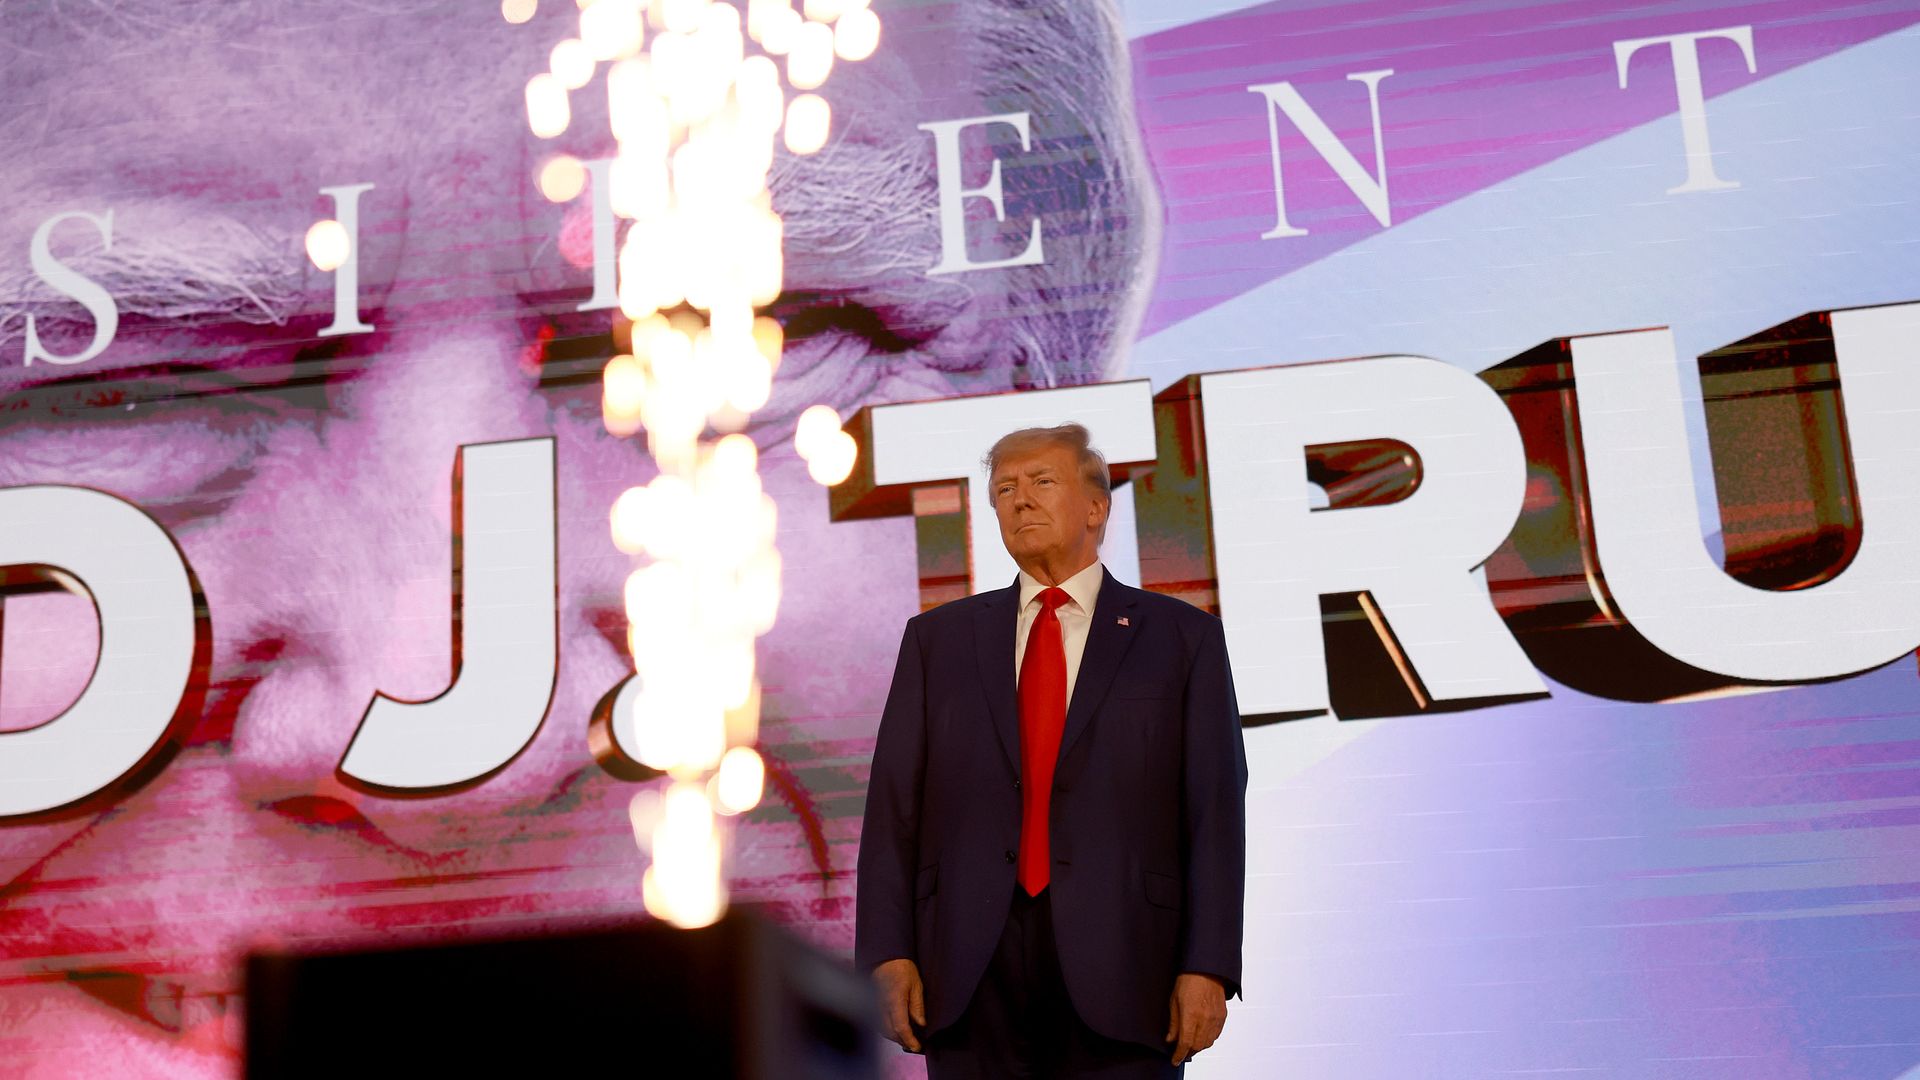 Former US President Donald Trump arrives on stage at the Turning Point Action conference as he continues his 2024 presidential campaign on July 15, 2023 in West Palm Beach, Florida